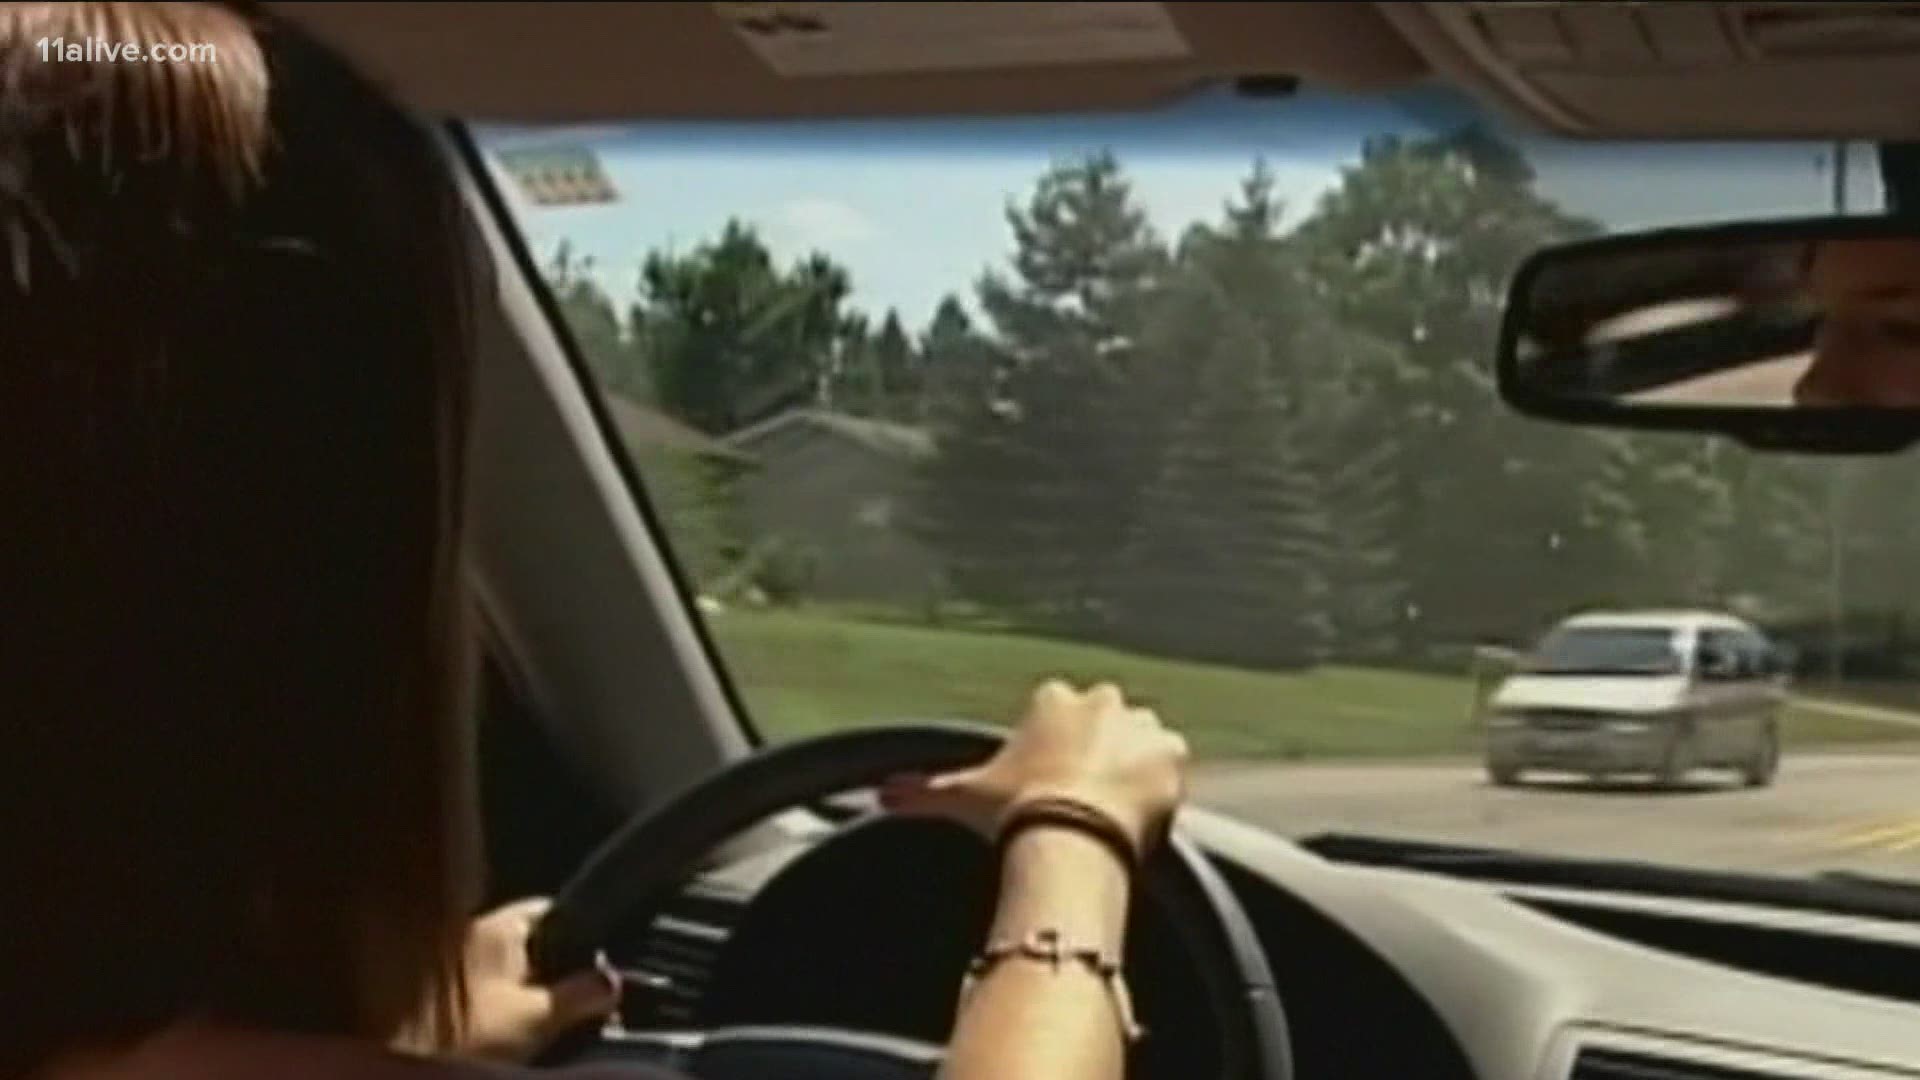 People should engage teens about safe driving habits to keep them safe, alert, and focused behind the steering wheel.